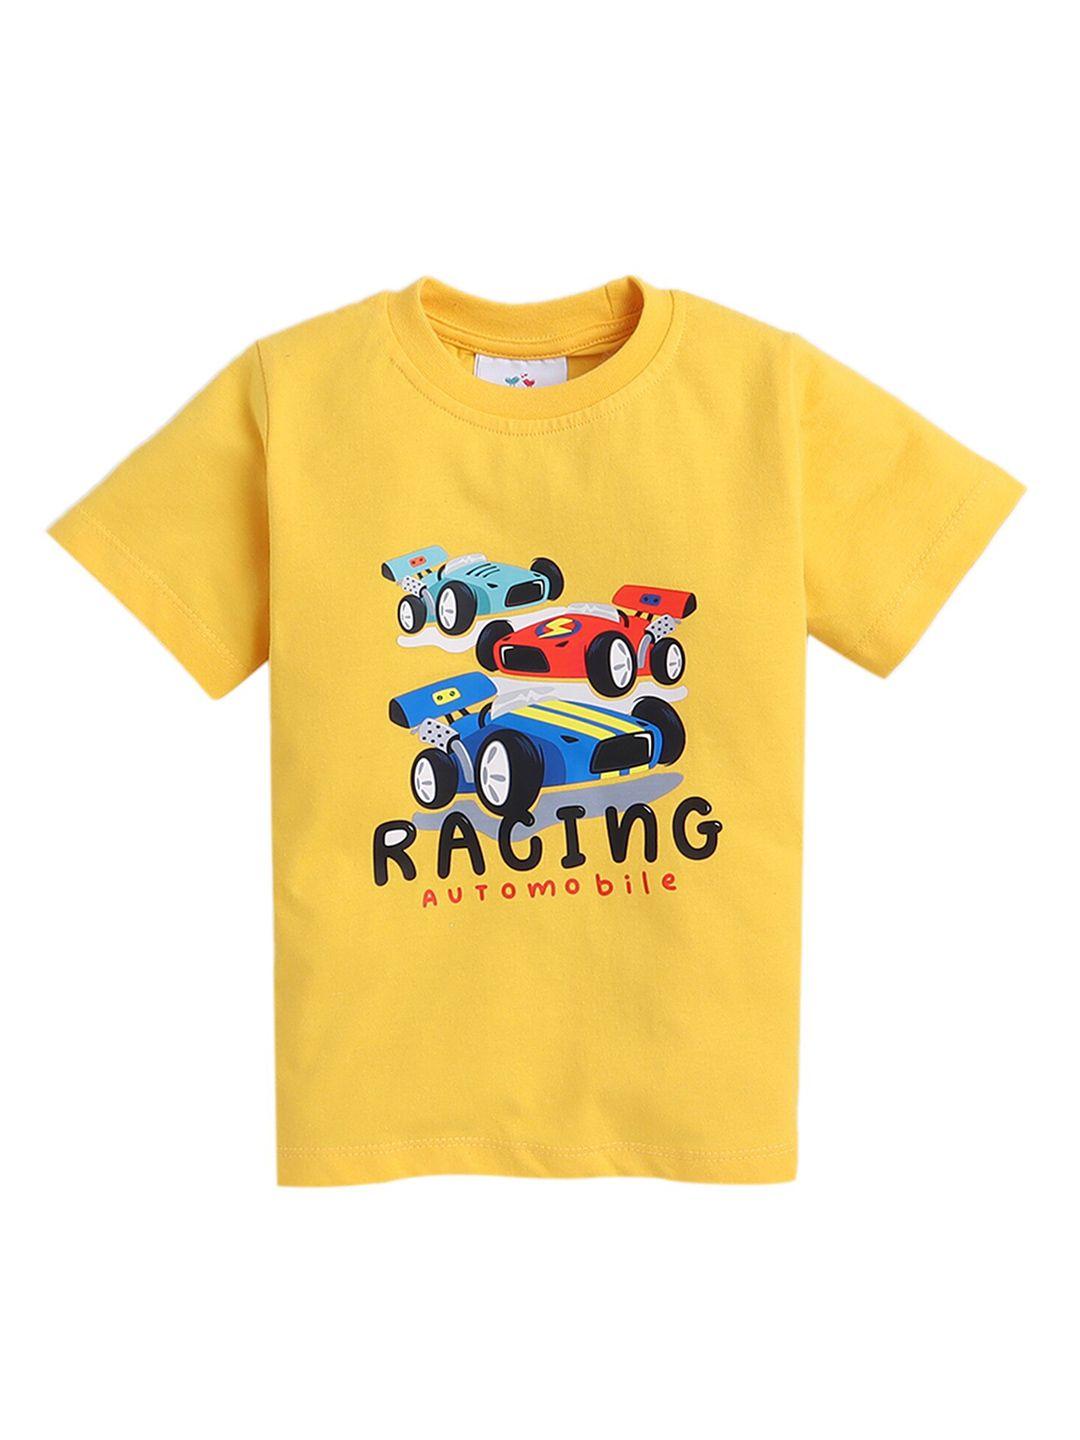 knitting-doodles-boys-graphic-printed-round-neck-regular-fit-cotton-t-shirt